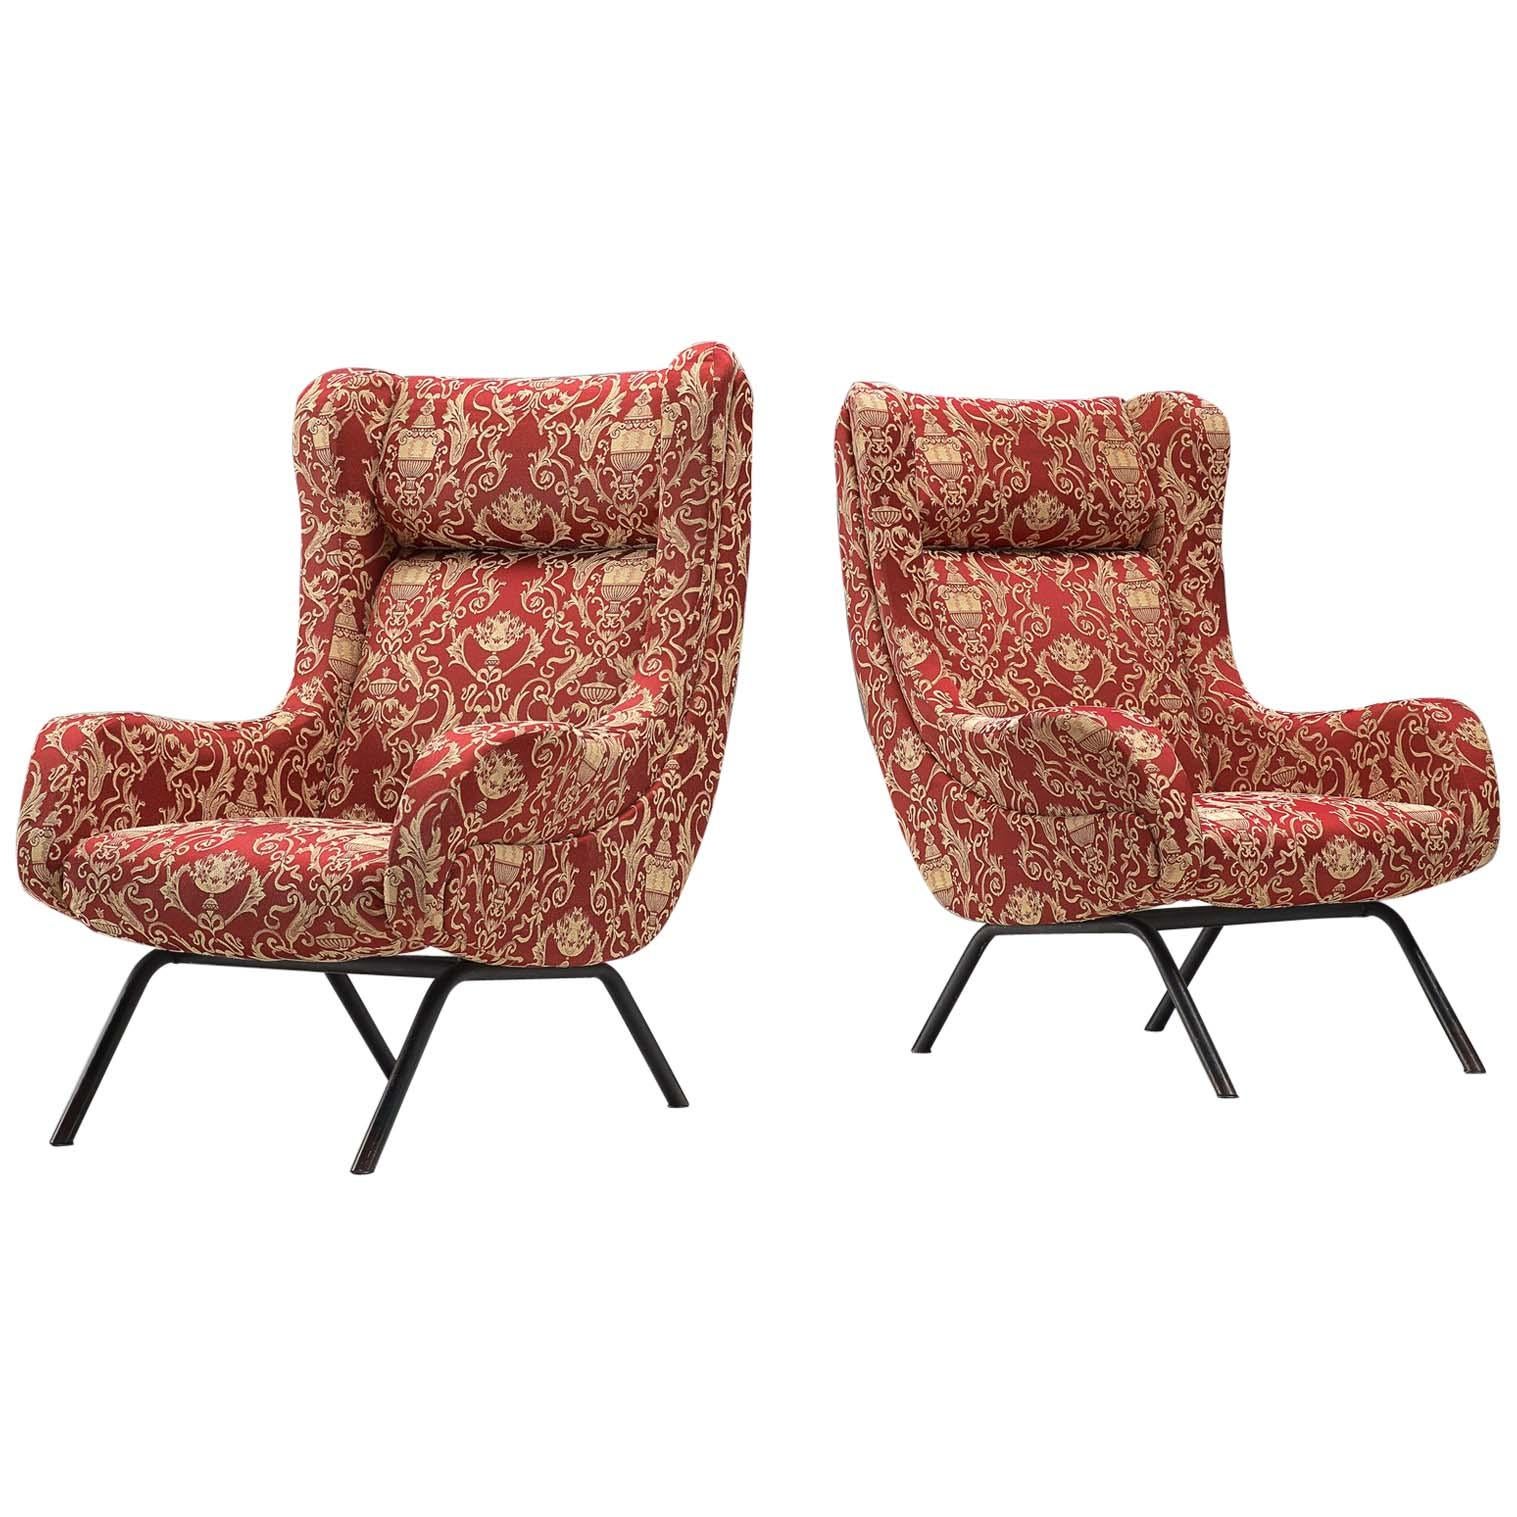 Two Italian Lounge Chairs in Baroque Patterned Fabric